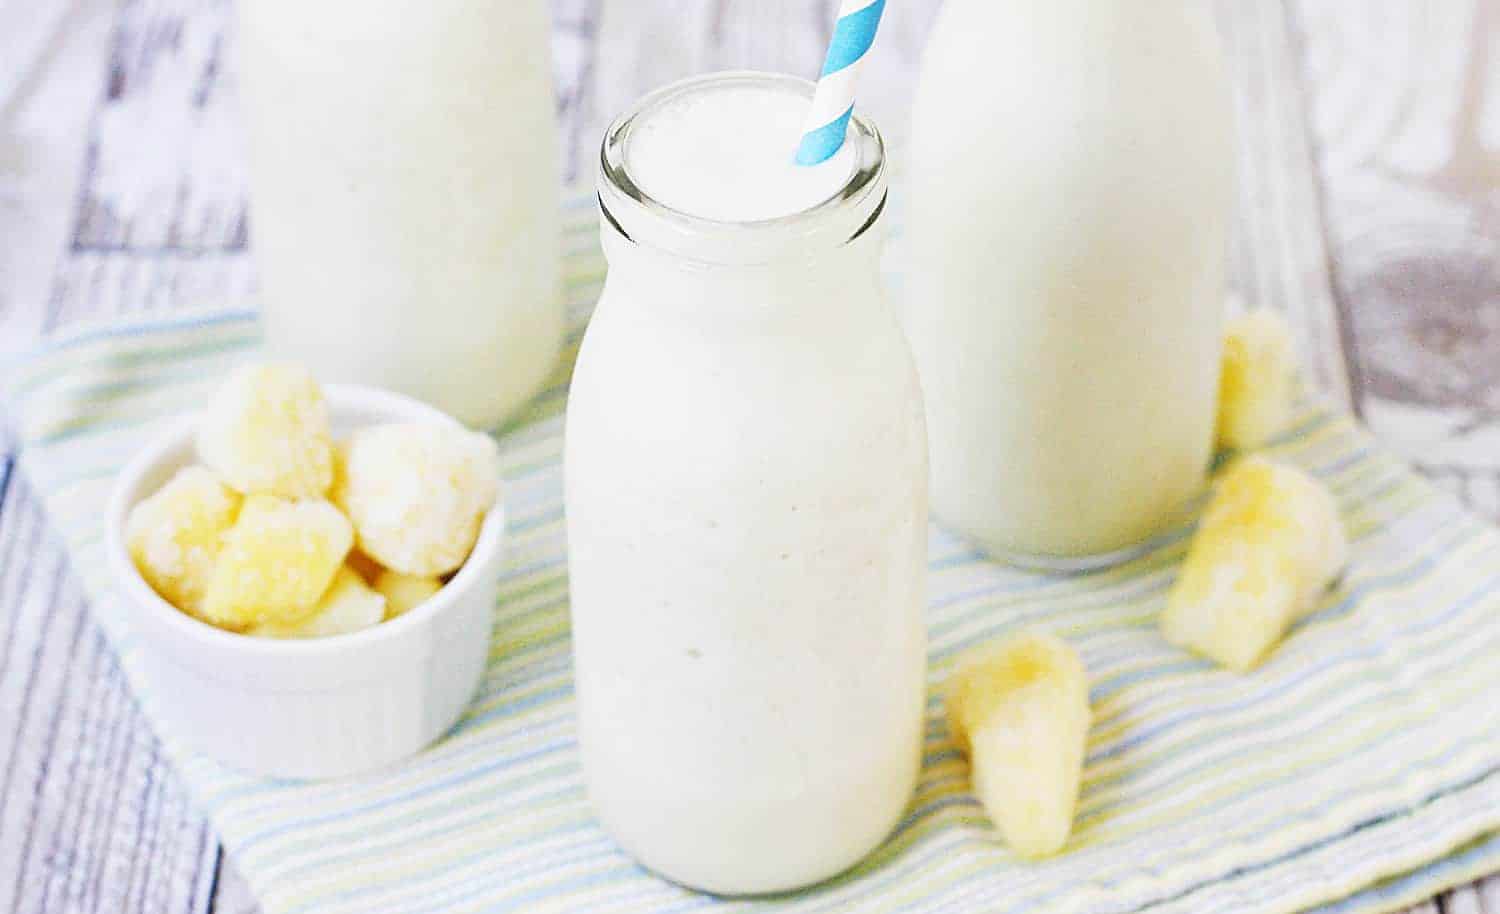 Pina Colada Protein Smoothie - This pina colada protein smoothie is an easy, healthy, delicious, protein-packed way to enjoy your favorite tropical beverage! #halfscratched #pinacolada #smoothie #proteinshake #proteinsmoothie #smoothierecipe #drinkrecipe #drink #healthyrecipe #healthy #pinacoladashake